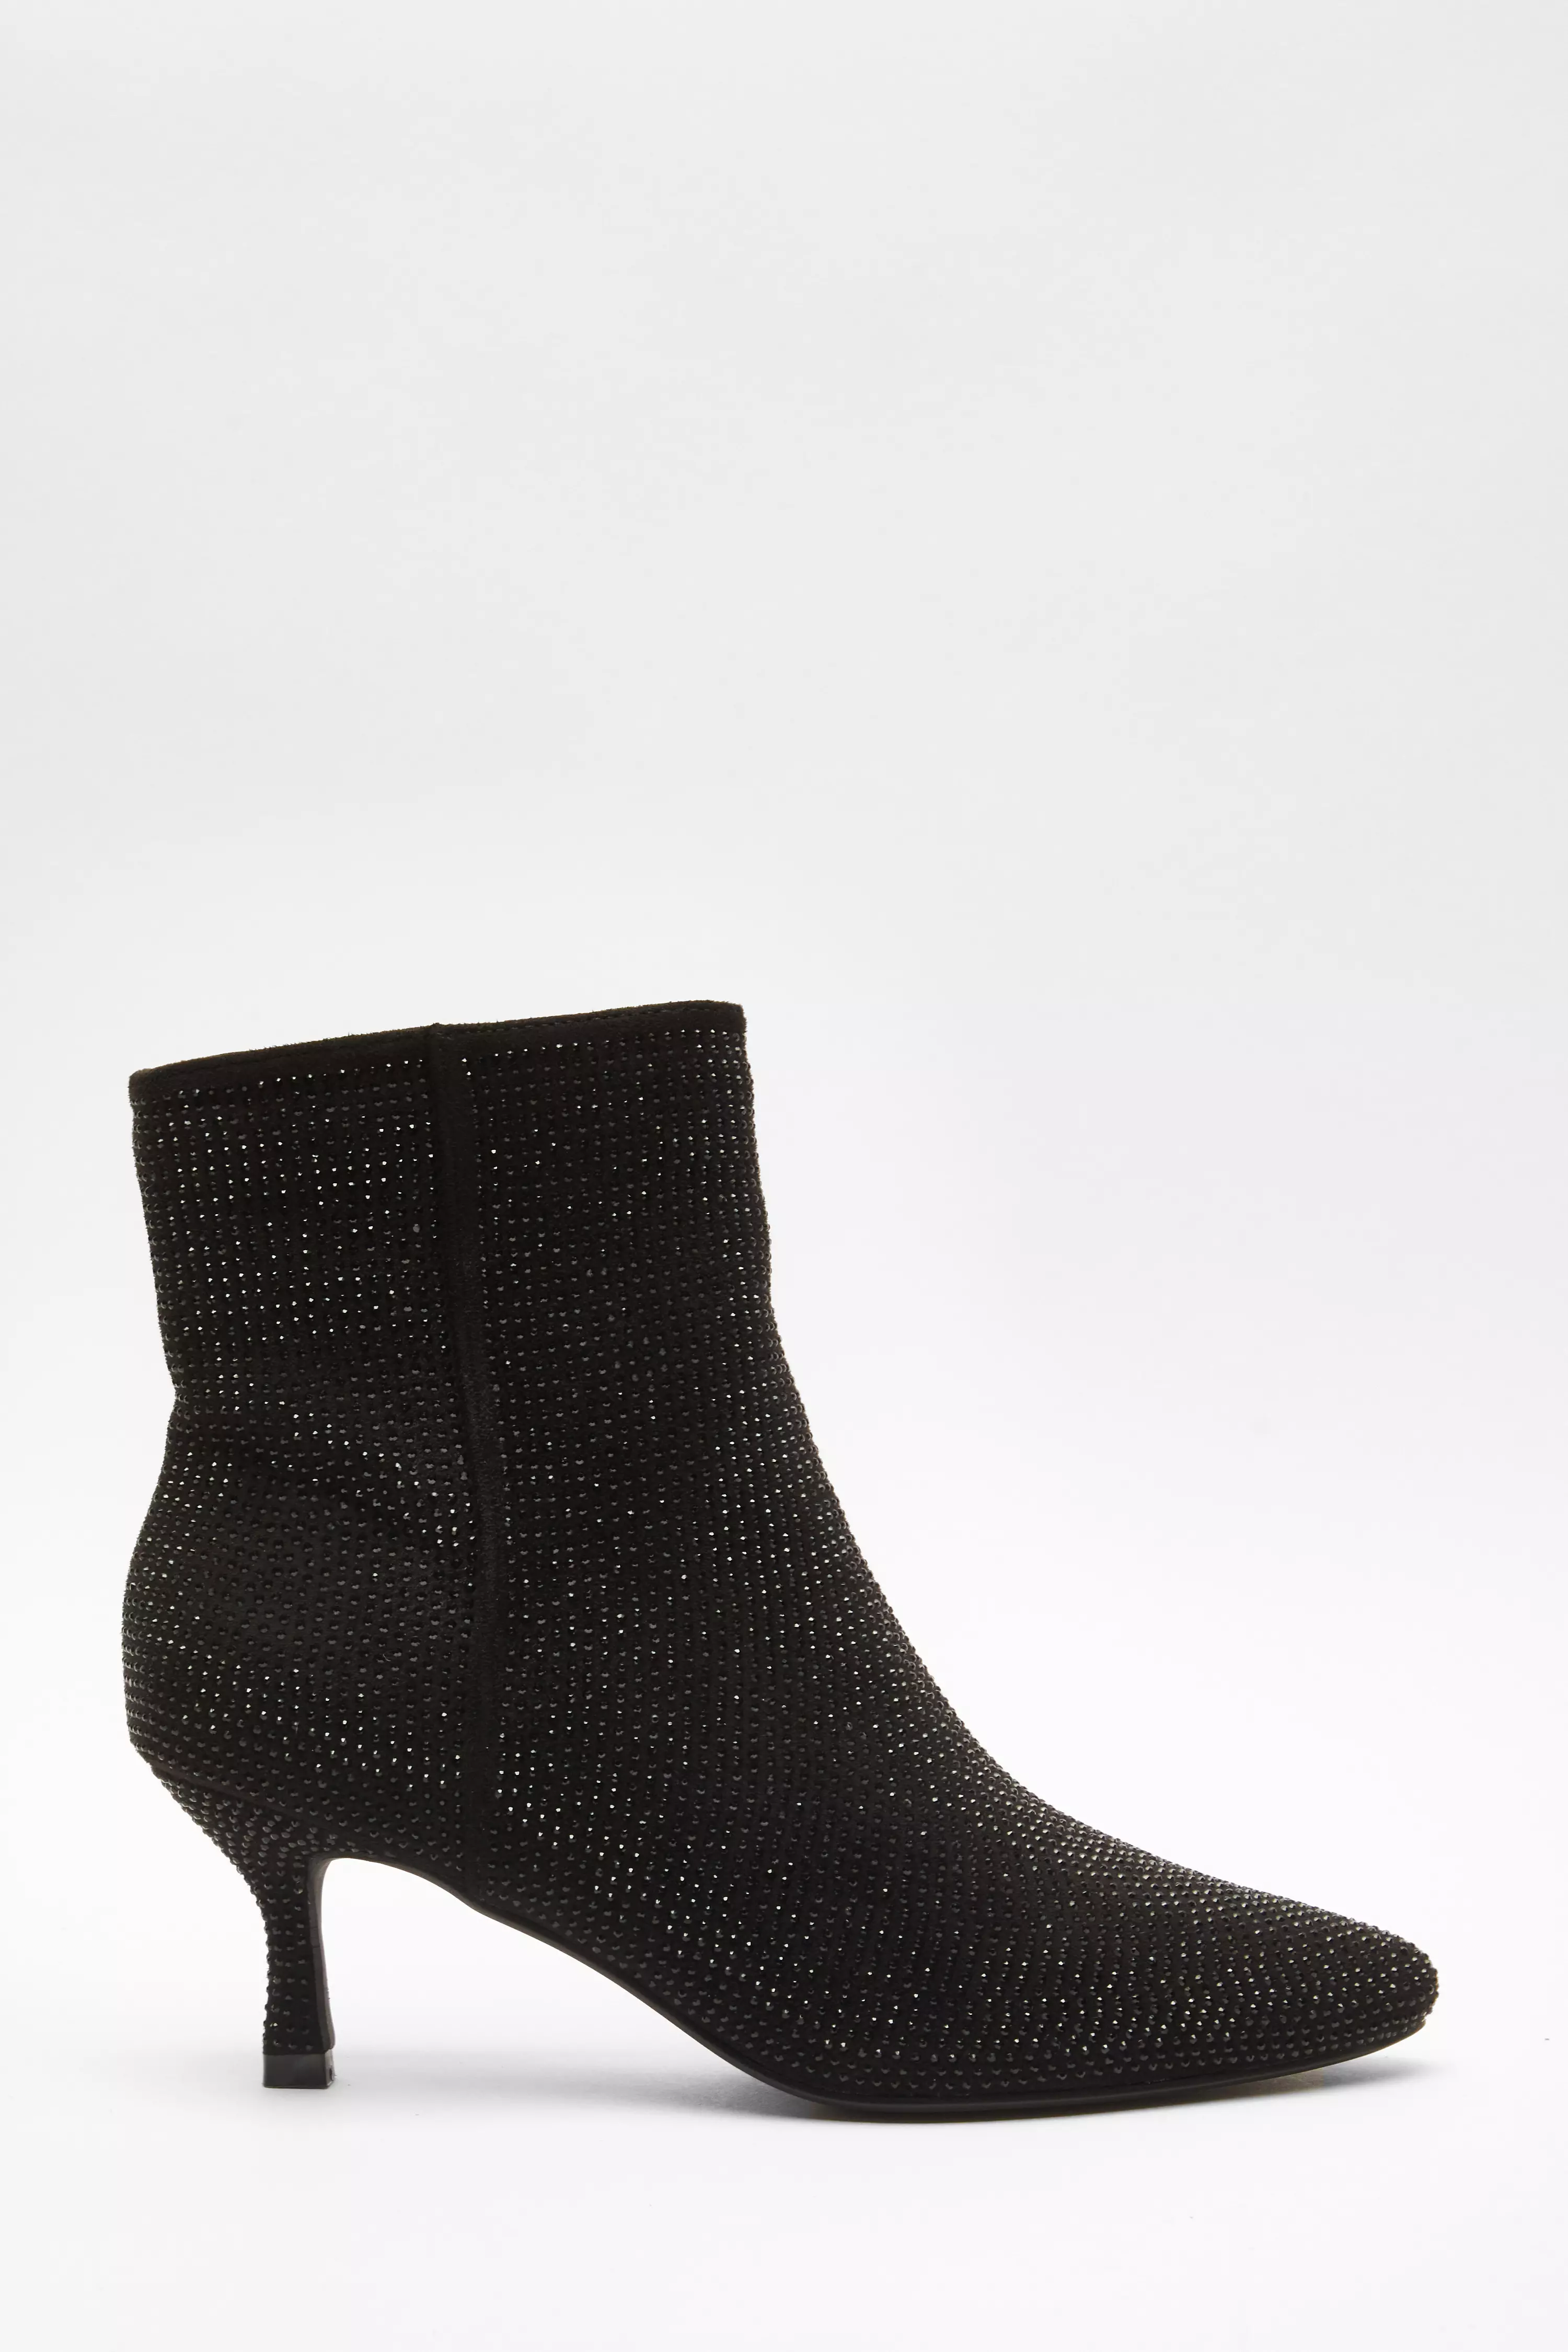 Black Diamante Ankle Heeled Faux Suede Boots